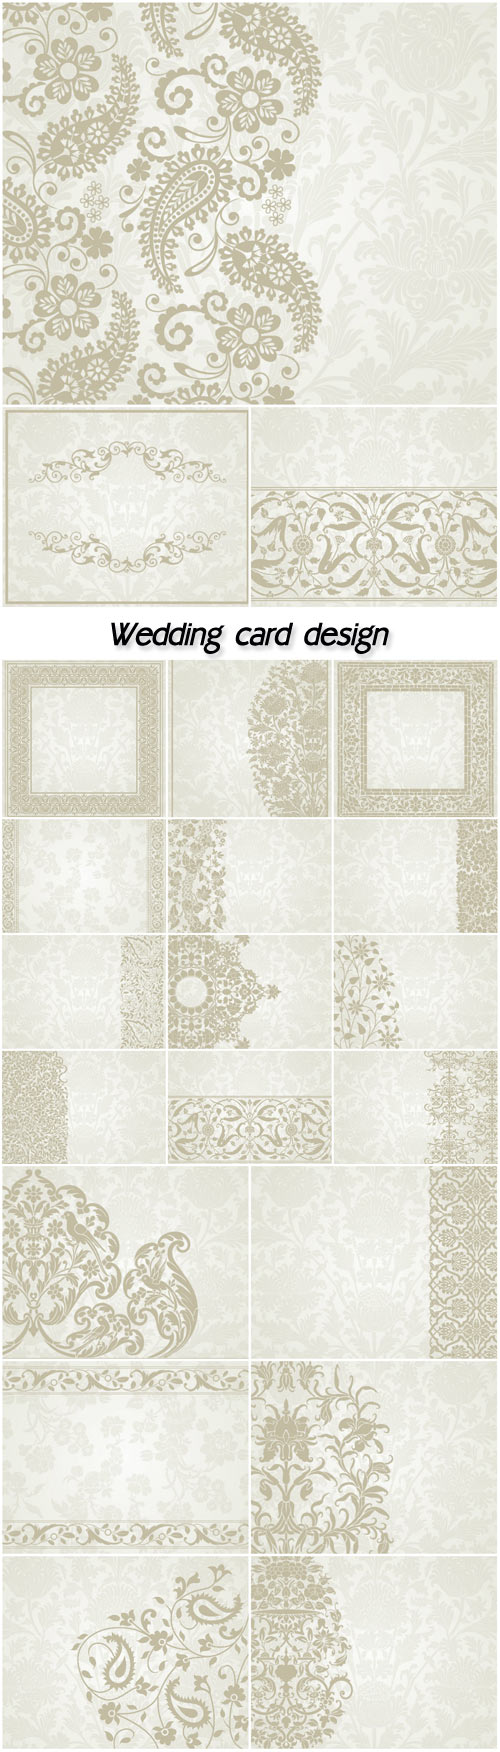 Wedding card design, paisley floral pattern, India